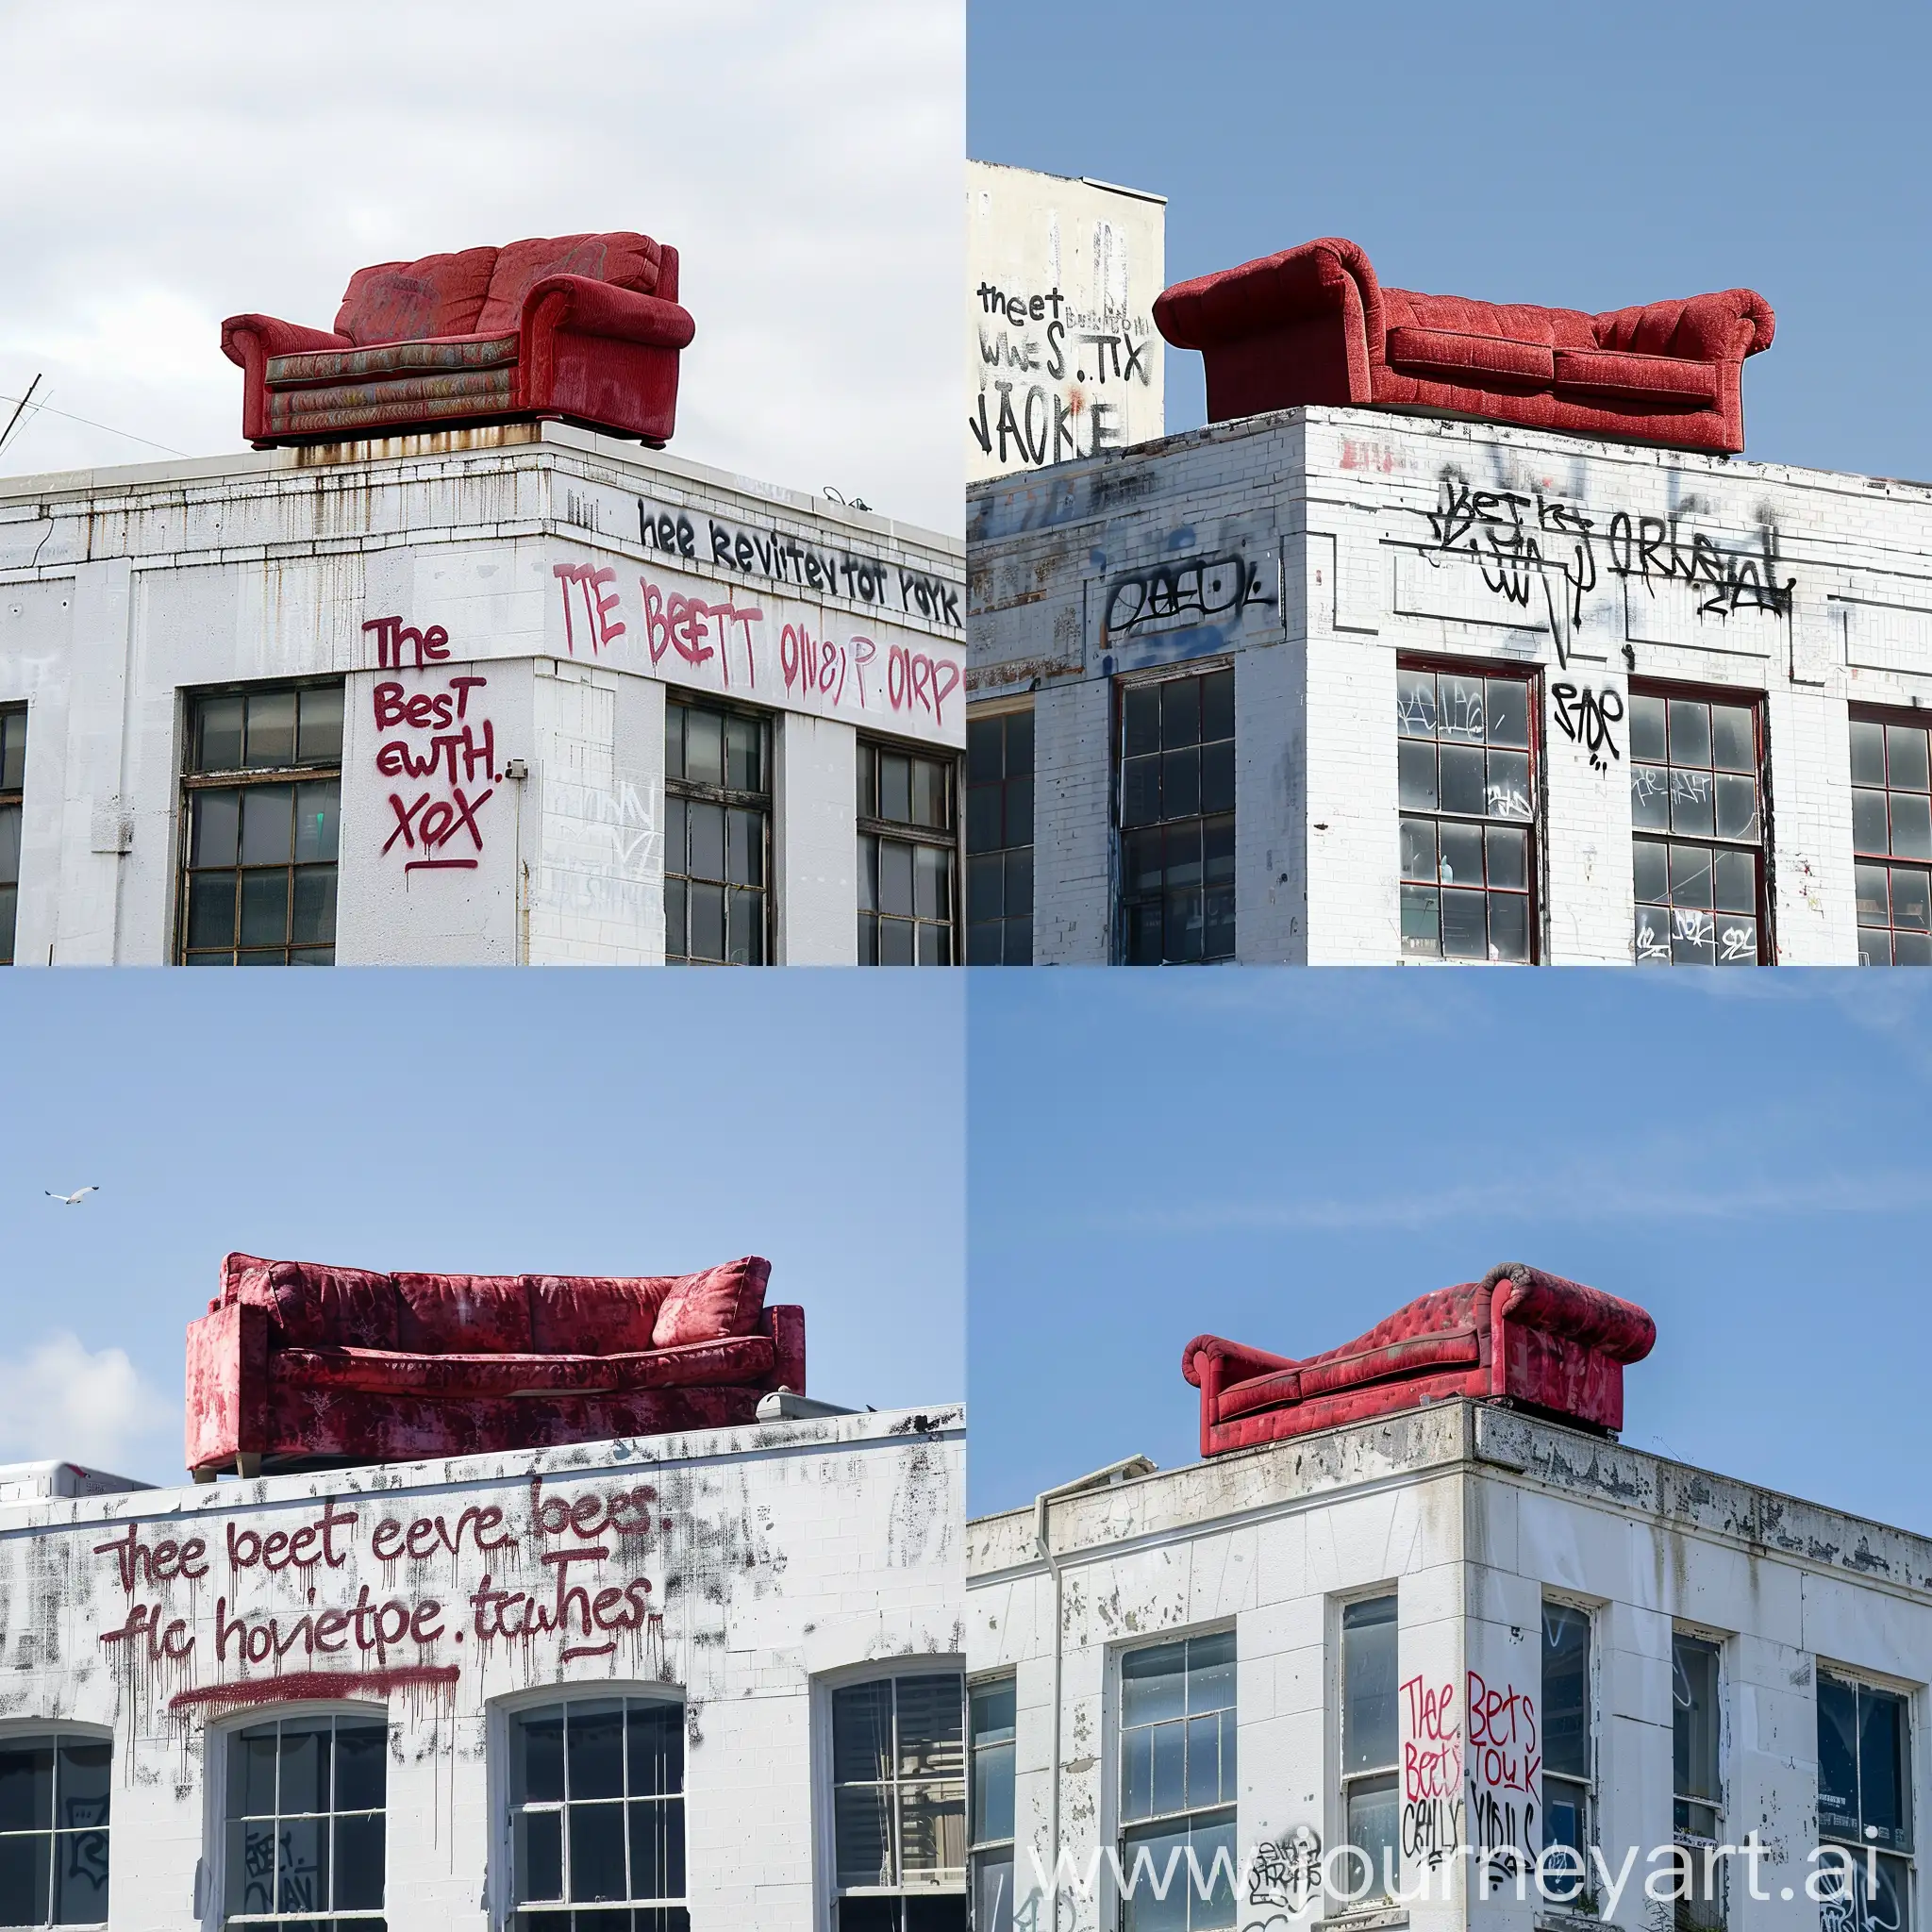 A red sofa on top of a white building. Graffiti with the text “the best view in the city